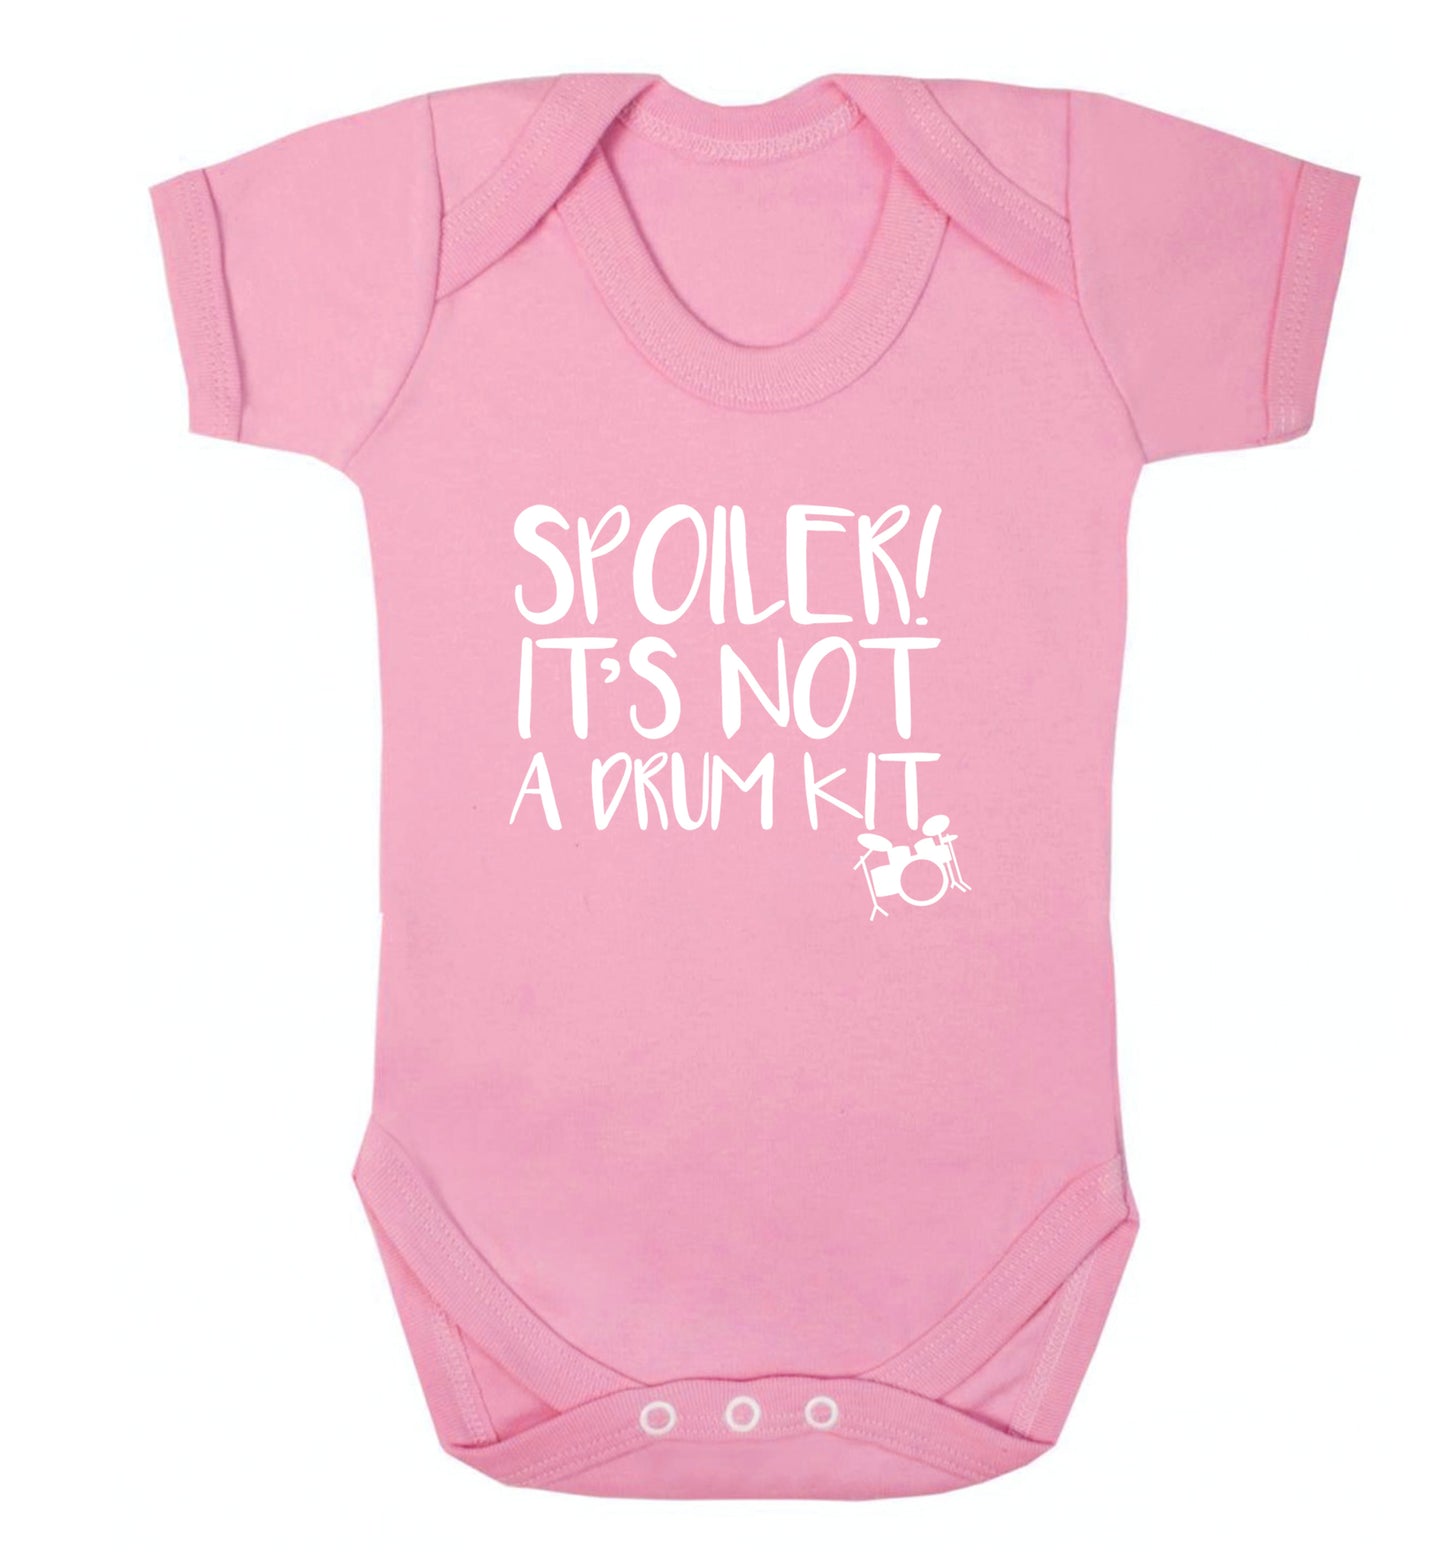 Spoiler it's not a drum kit Baby Vest pale pink 18-24 months